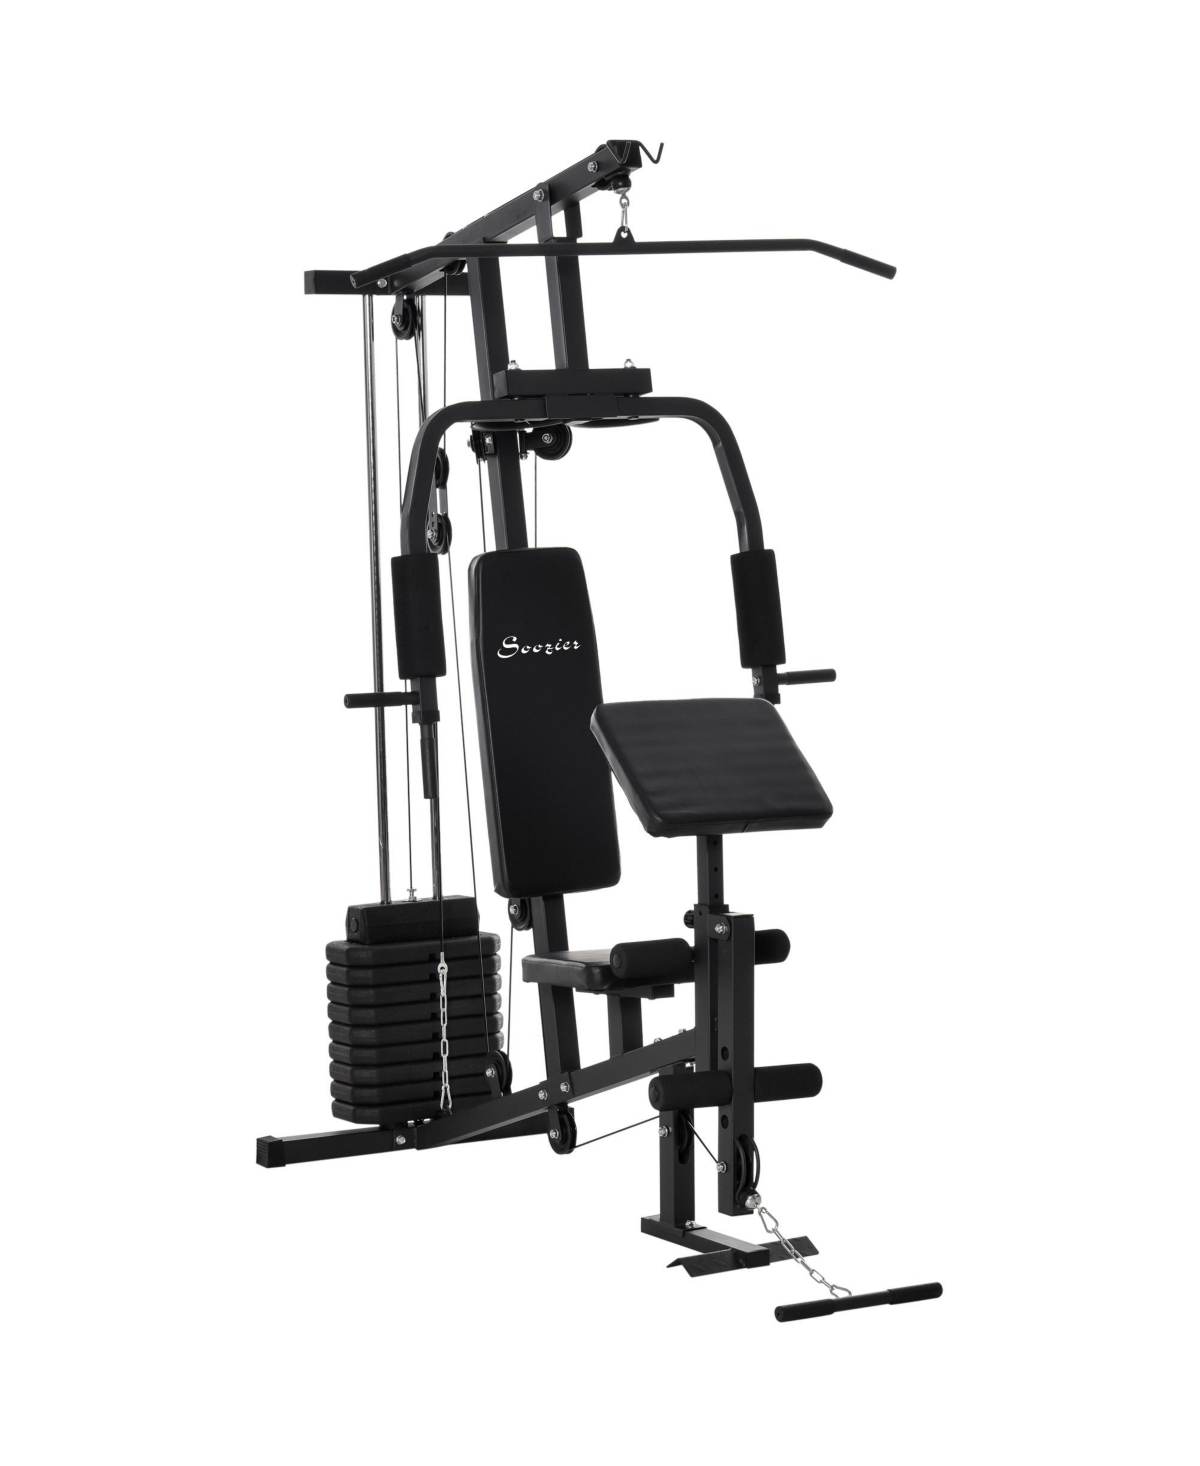 Multifunction Home Gym Station w/ Pull-up Stand, Dip Station, Weight Stack Machine for Full Body Workout - Black